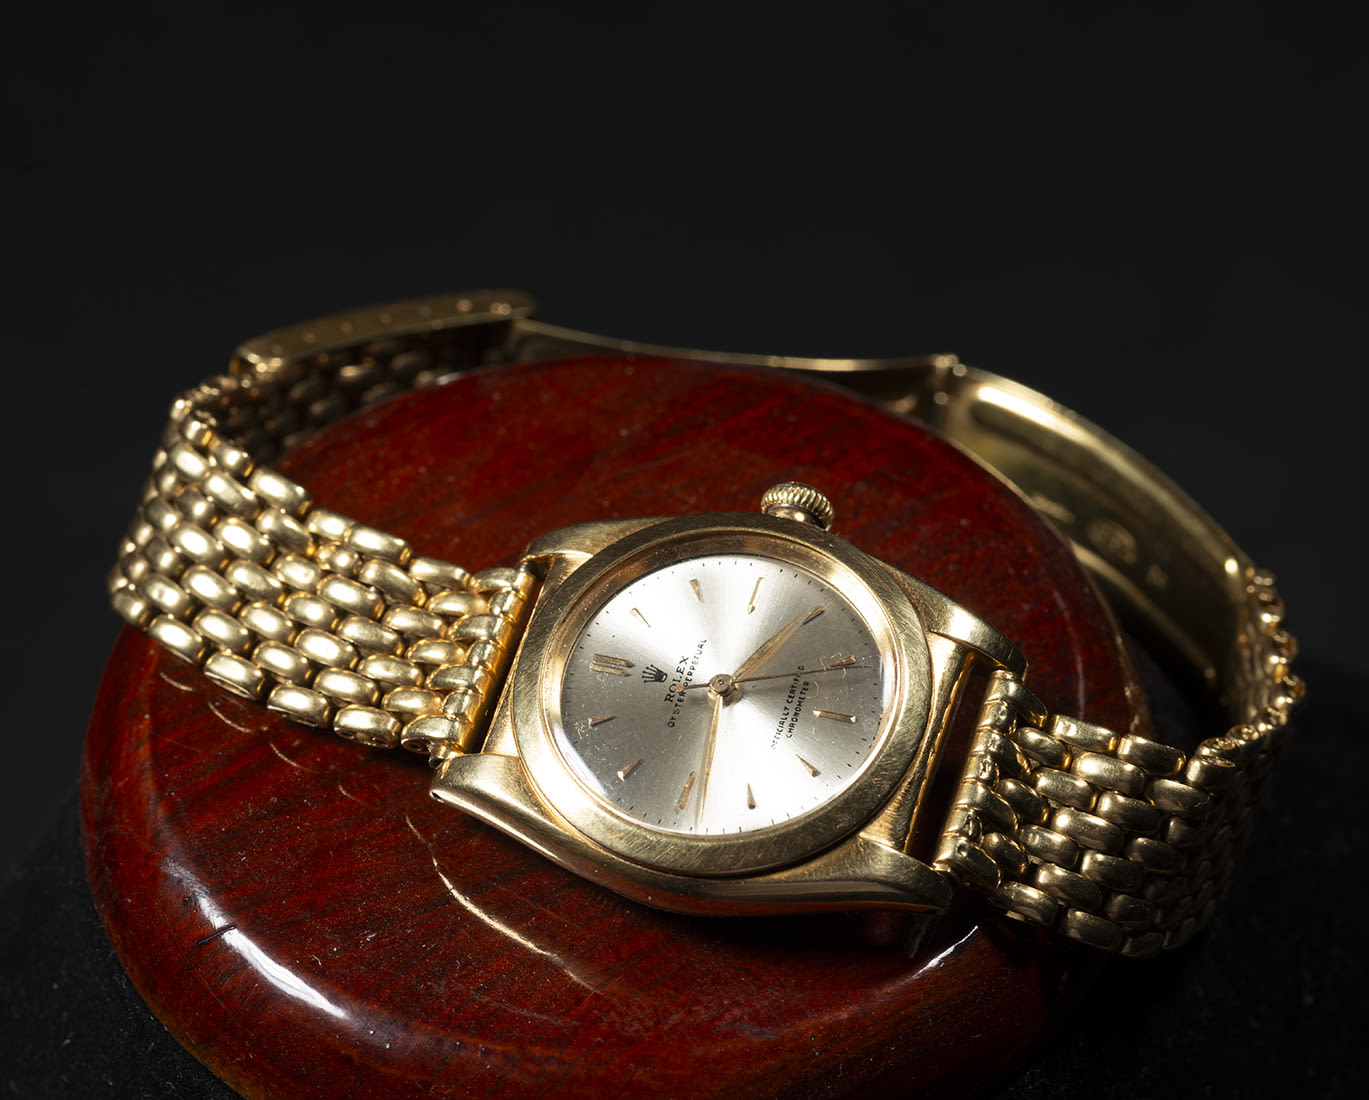 Rolex Oyster in 18k solid gold with complimentary 18k gold jubilee bracelet, model Oyster Perpetual - Image 5 of 5